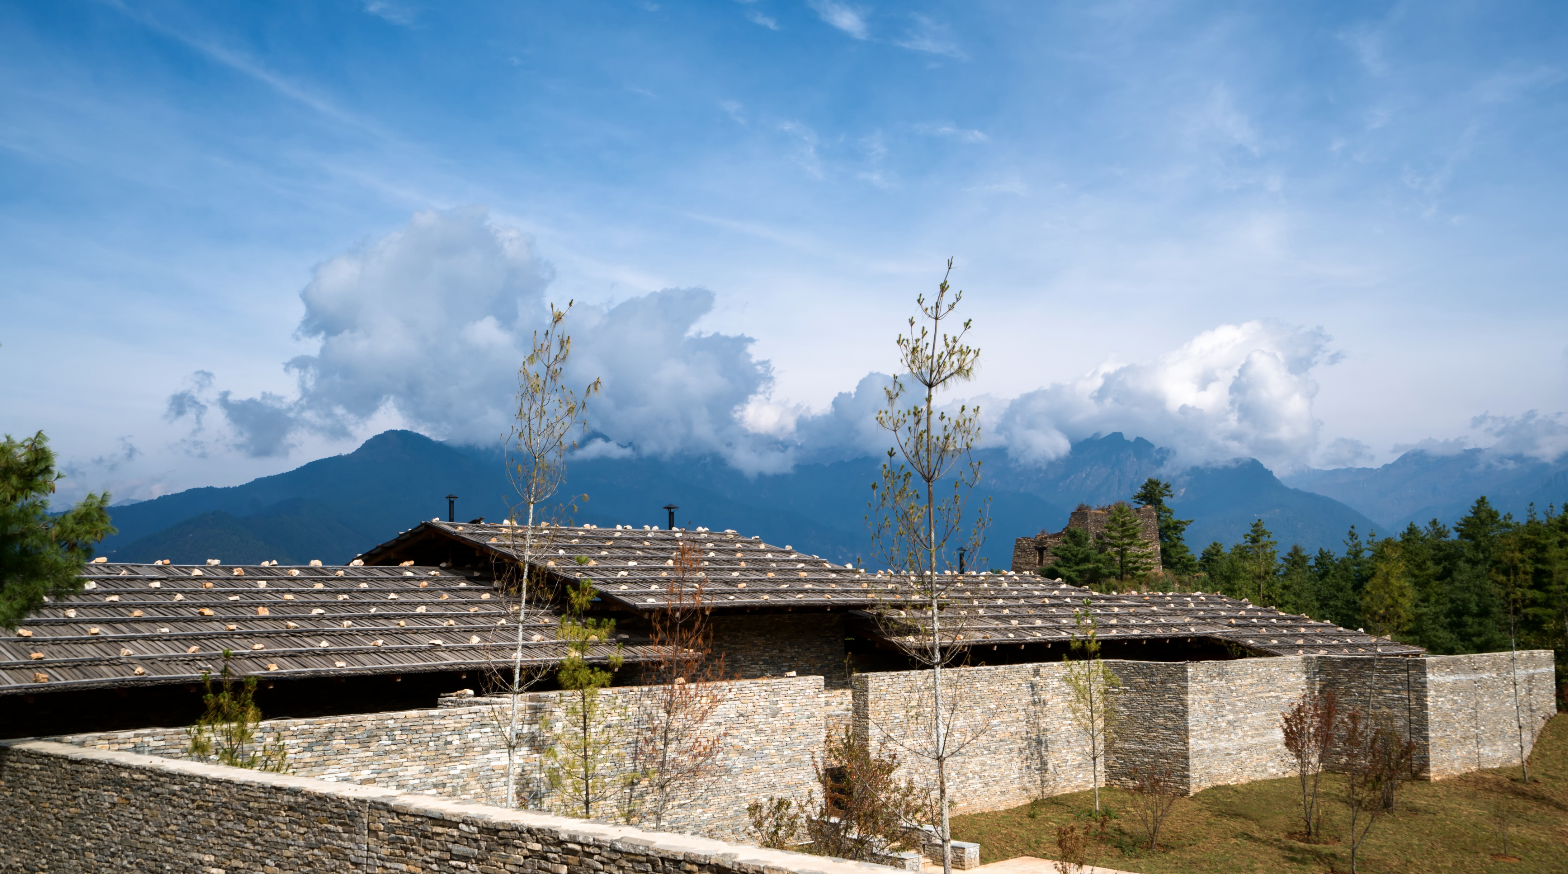 [Hotels by Design 2019] New Resort of the Happiest Place in Asia—Six Senses Bhutan